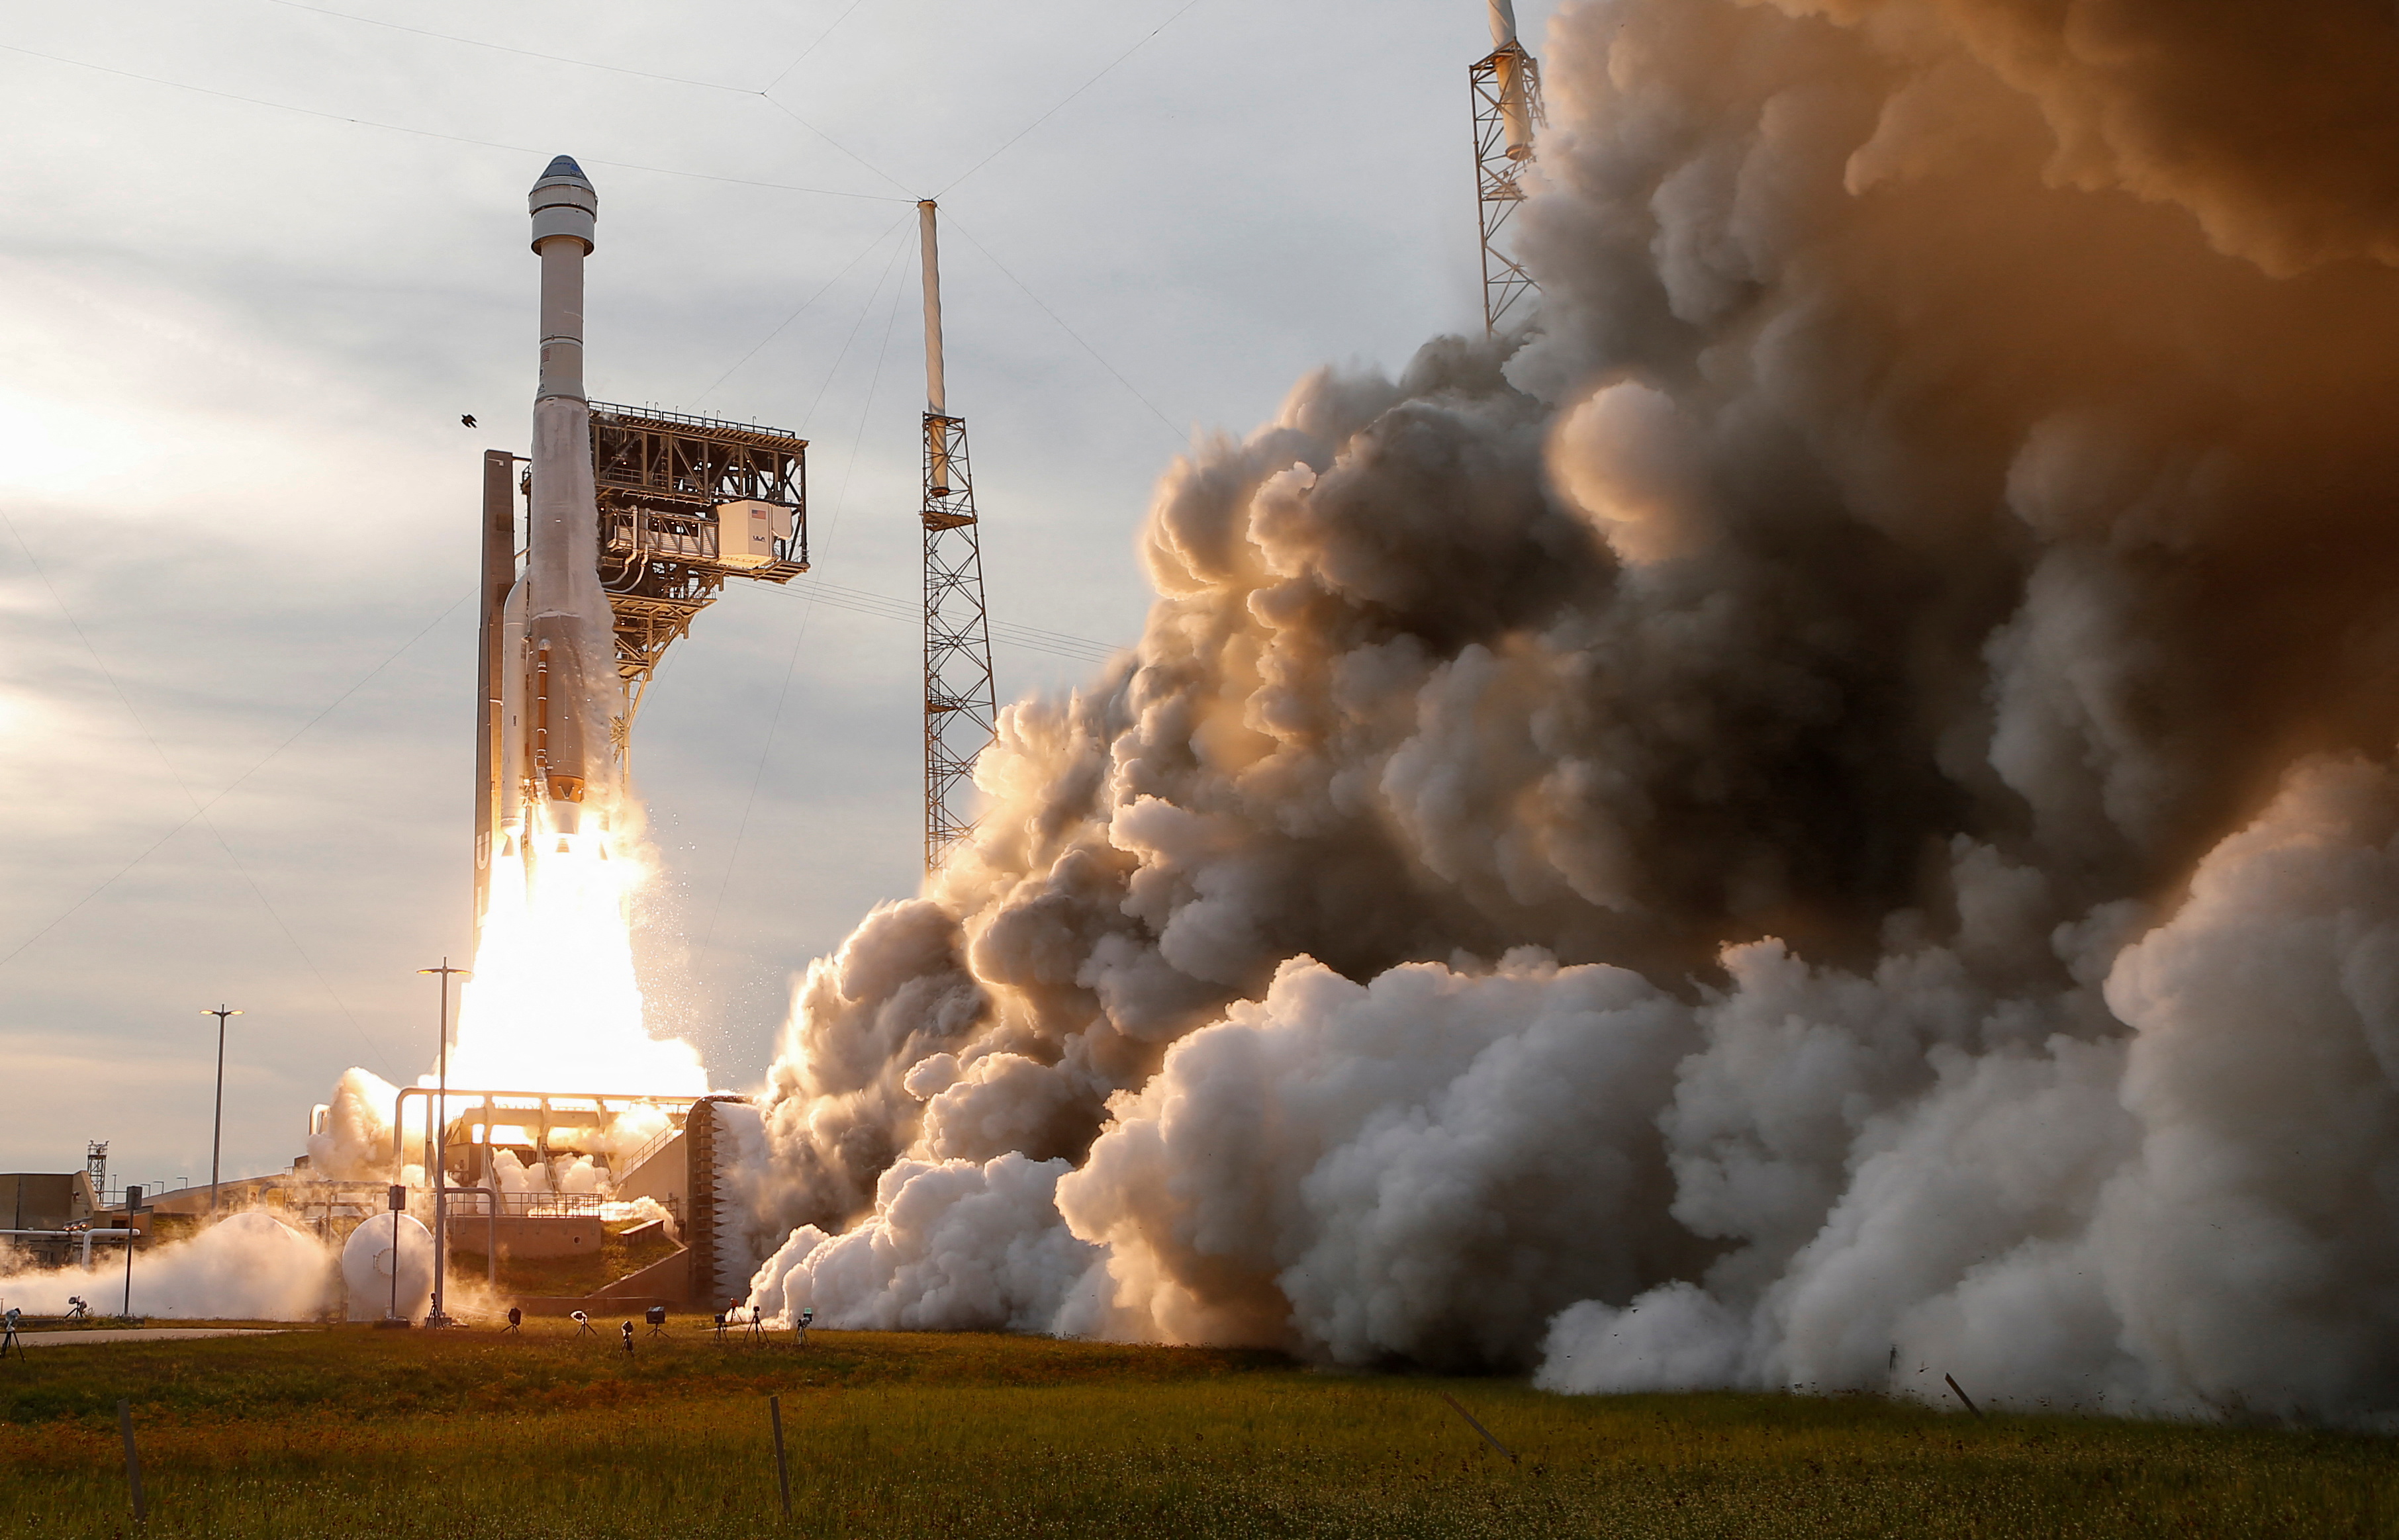 Boeing's CST-100 Starliner capsule launches aboard a United Launch Alliance Atlas 5 rocket on a second un-crewed test flight to the International Space Station, at Cape Canaveral